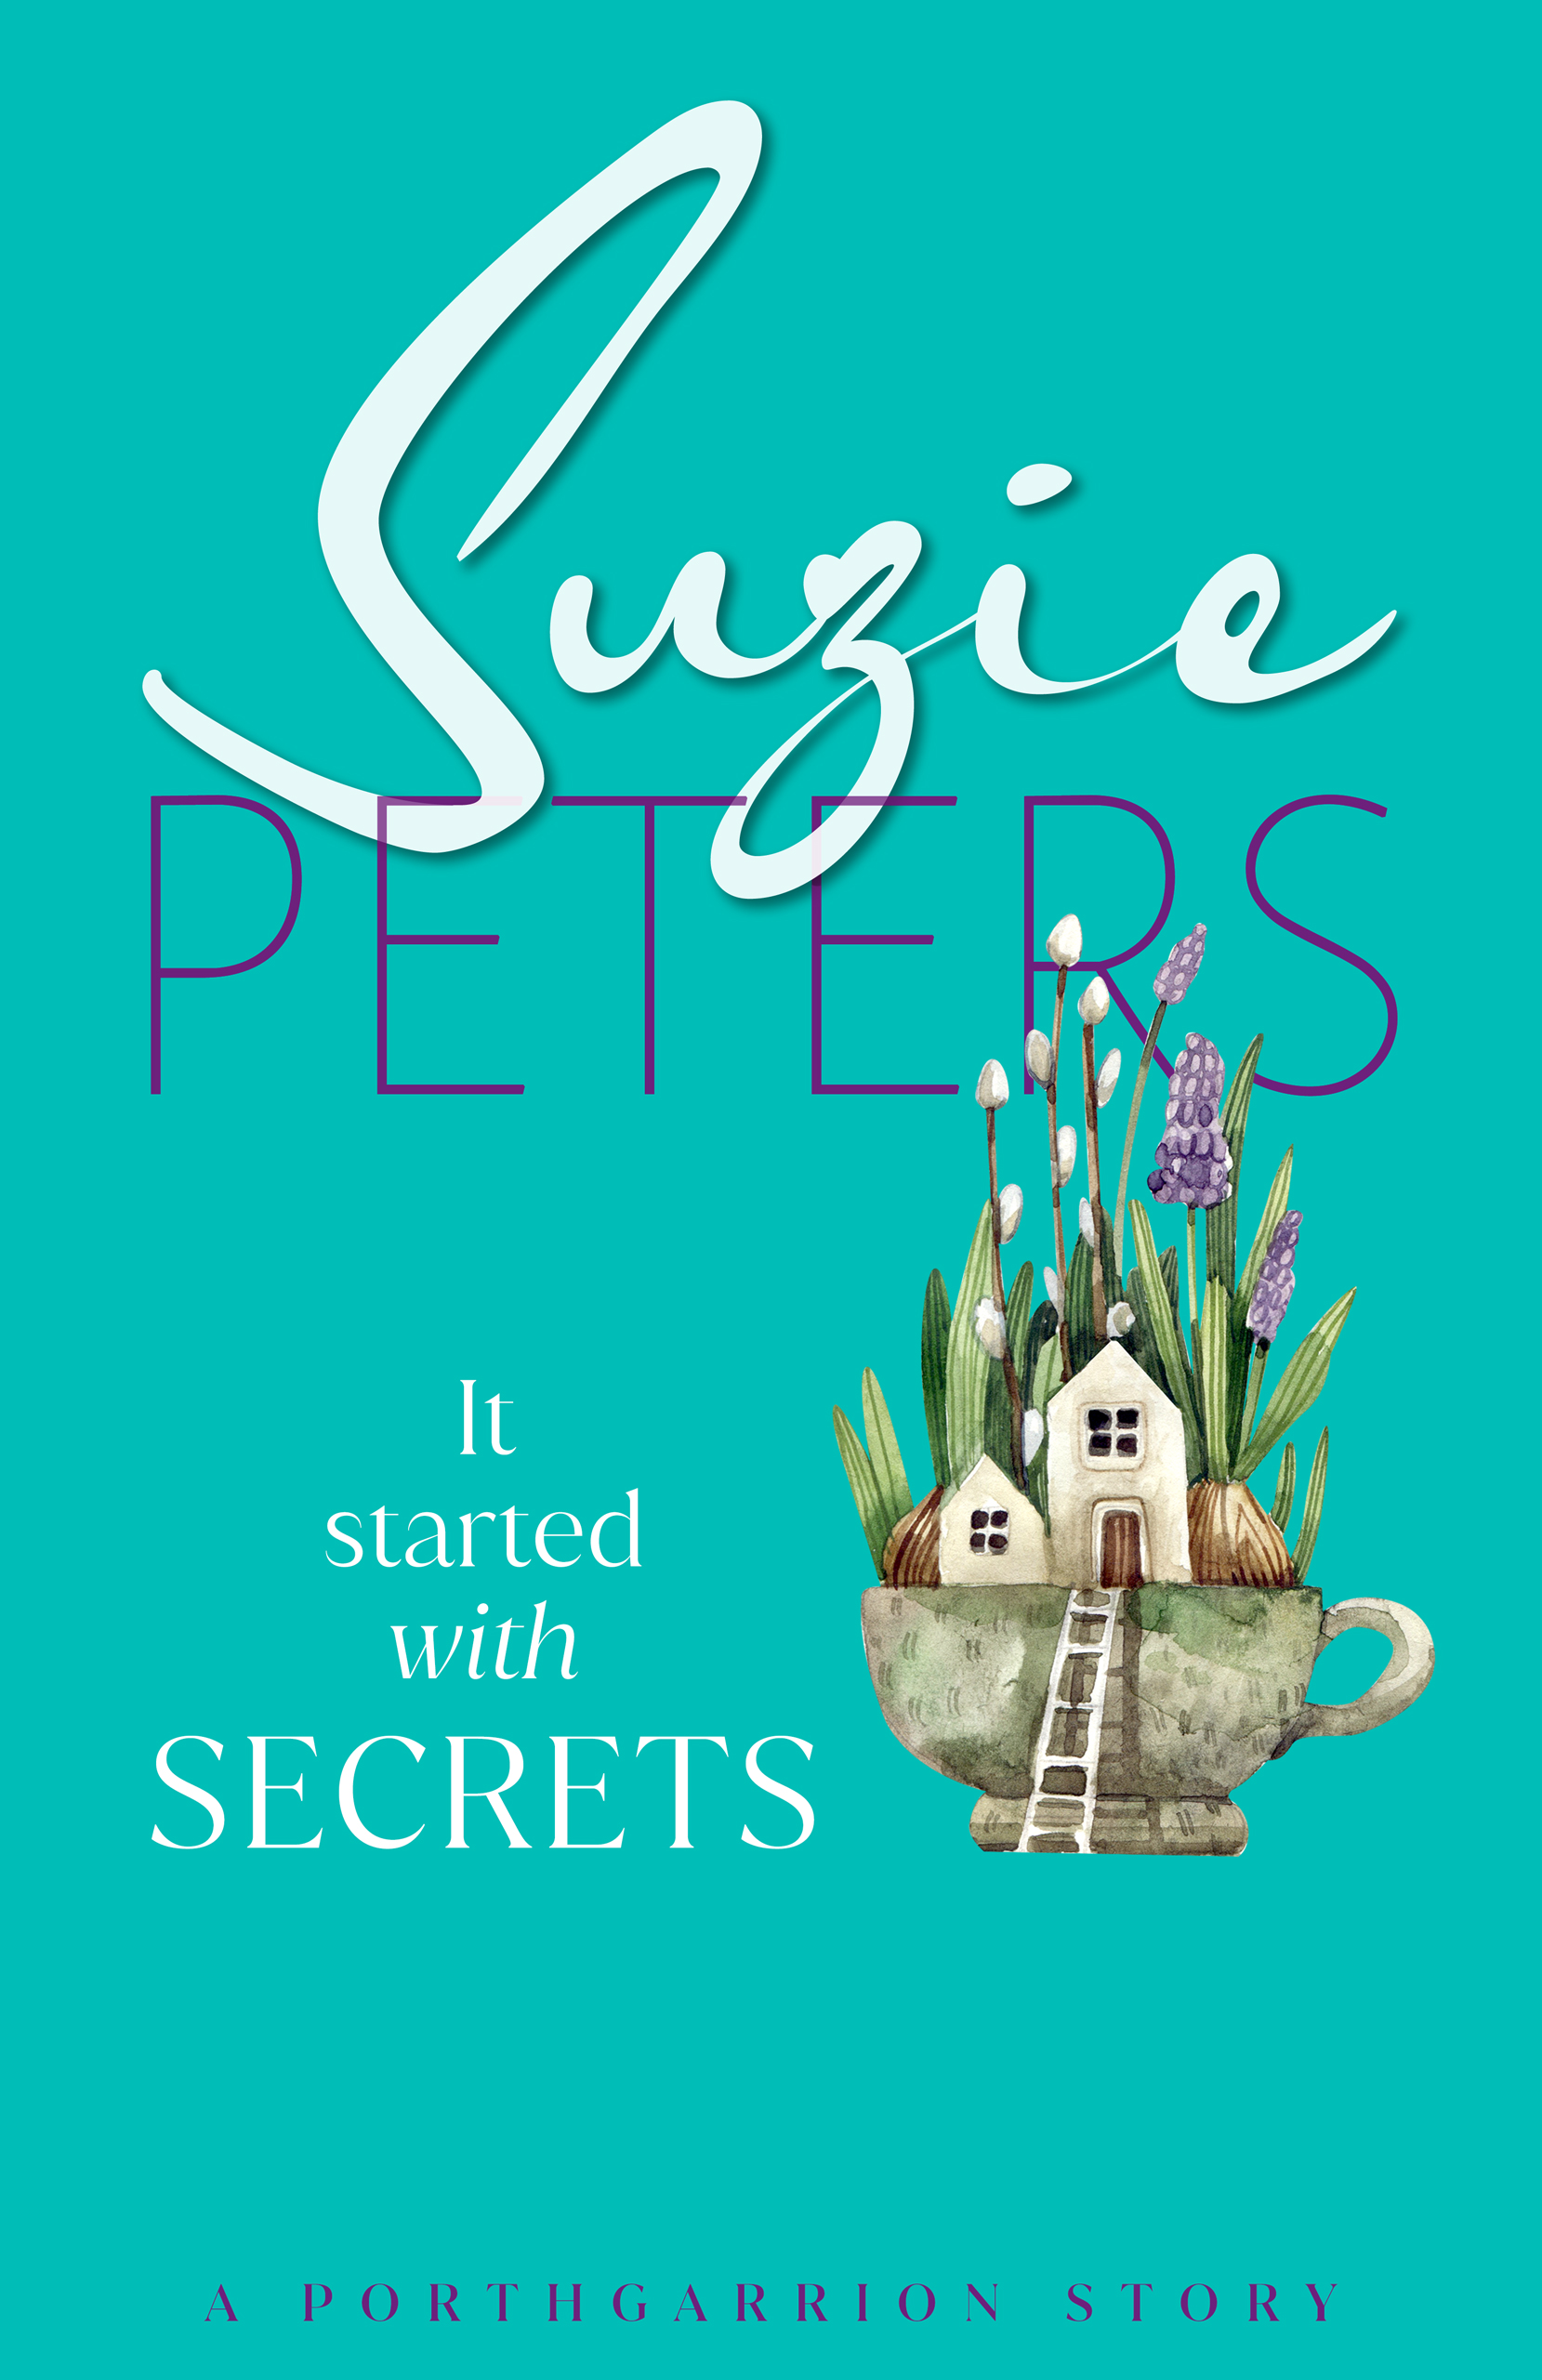 Porthgarrion Series: It Started with Secrets by Suzie Peters.